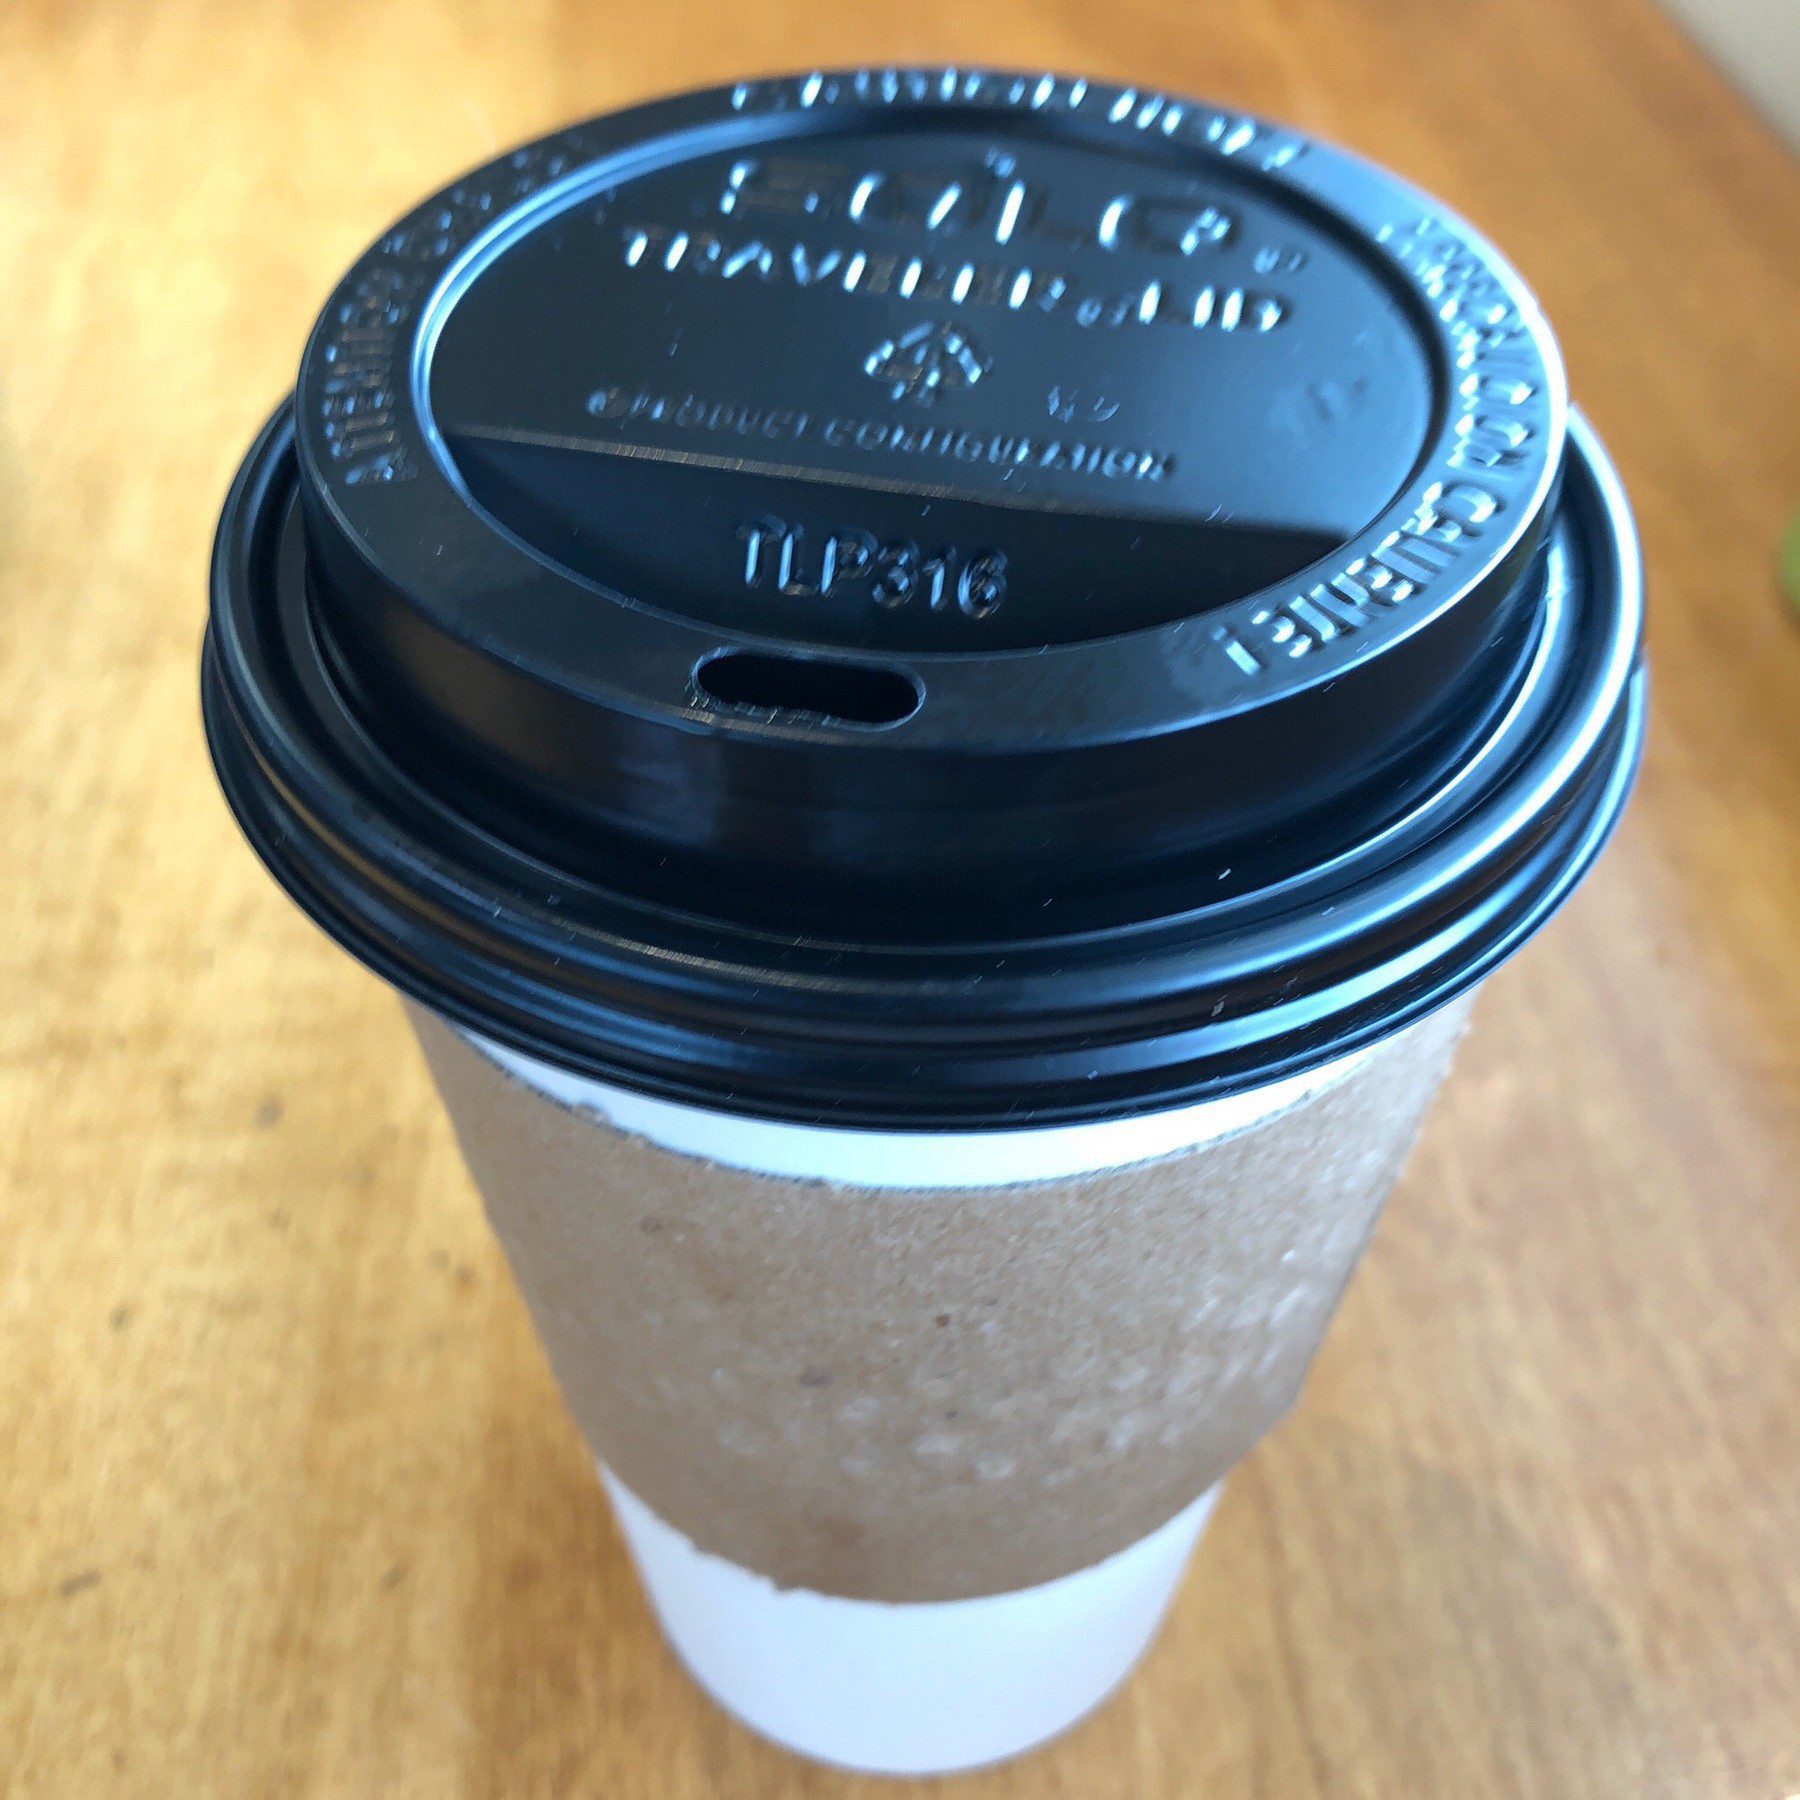 Takeout coffee cup